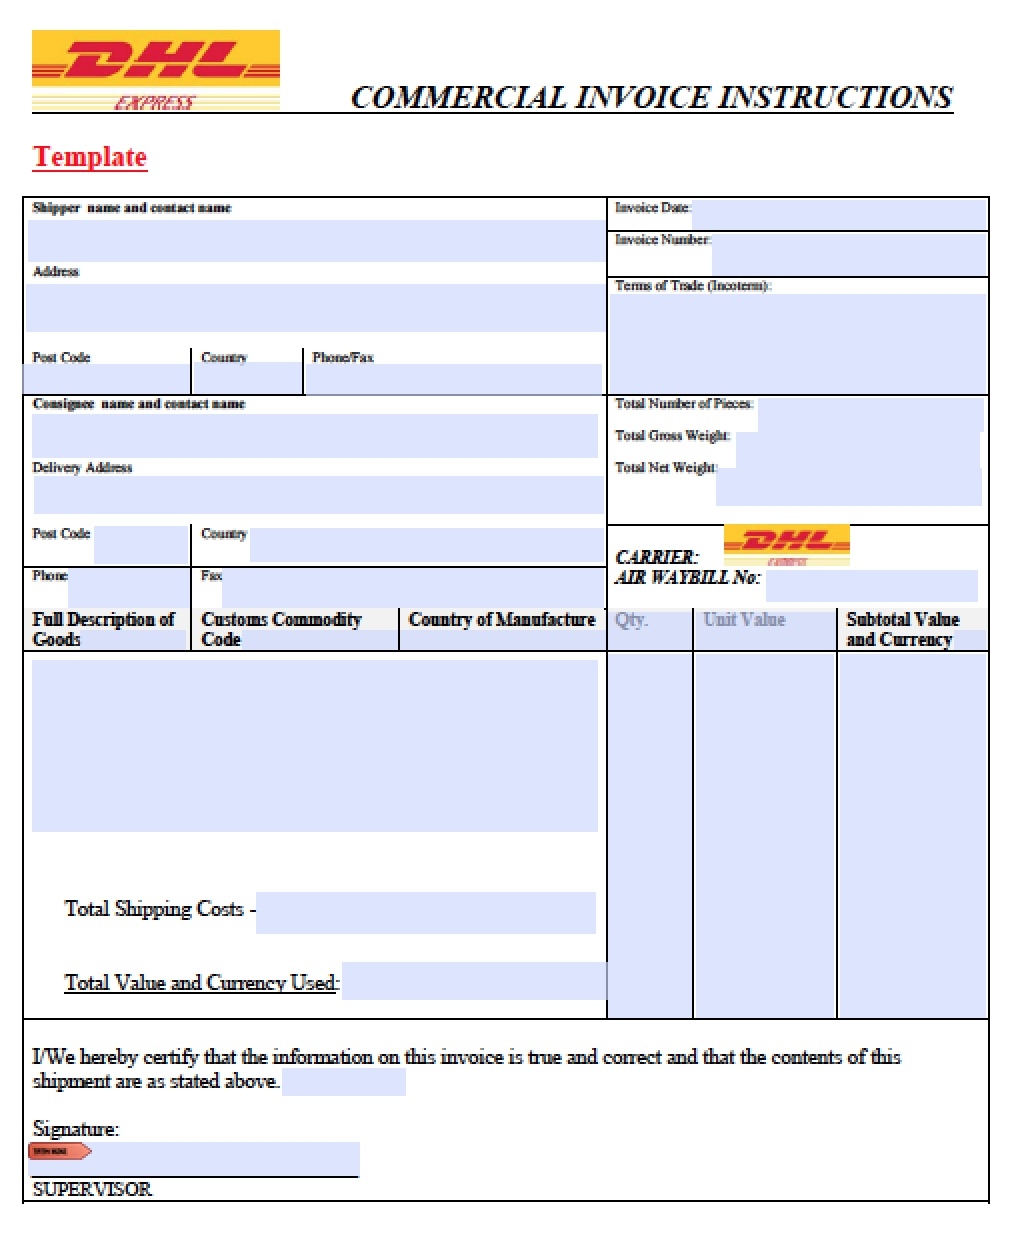 commercial invoice dhl free dhl commercial invoice template excel pdf word doc 1022 X 1244